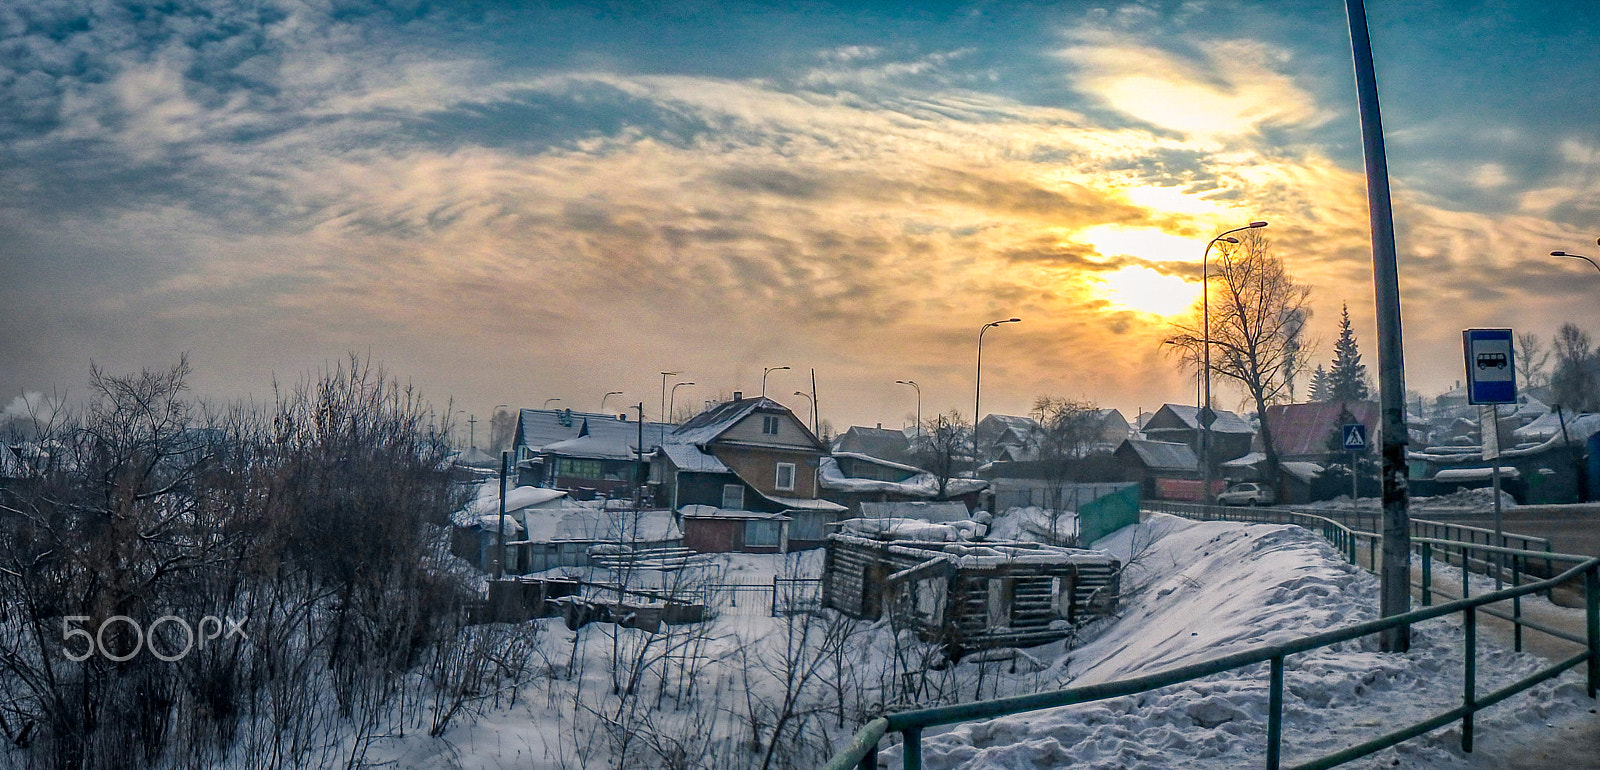 Olympus TG-860 sample photo. Winter dawn in the village photography